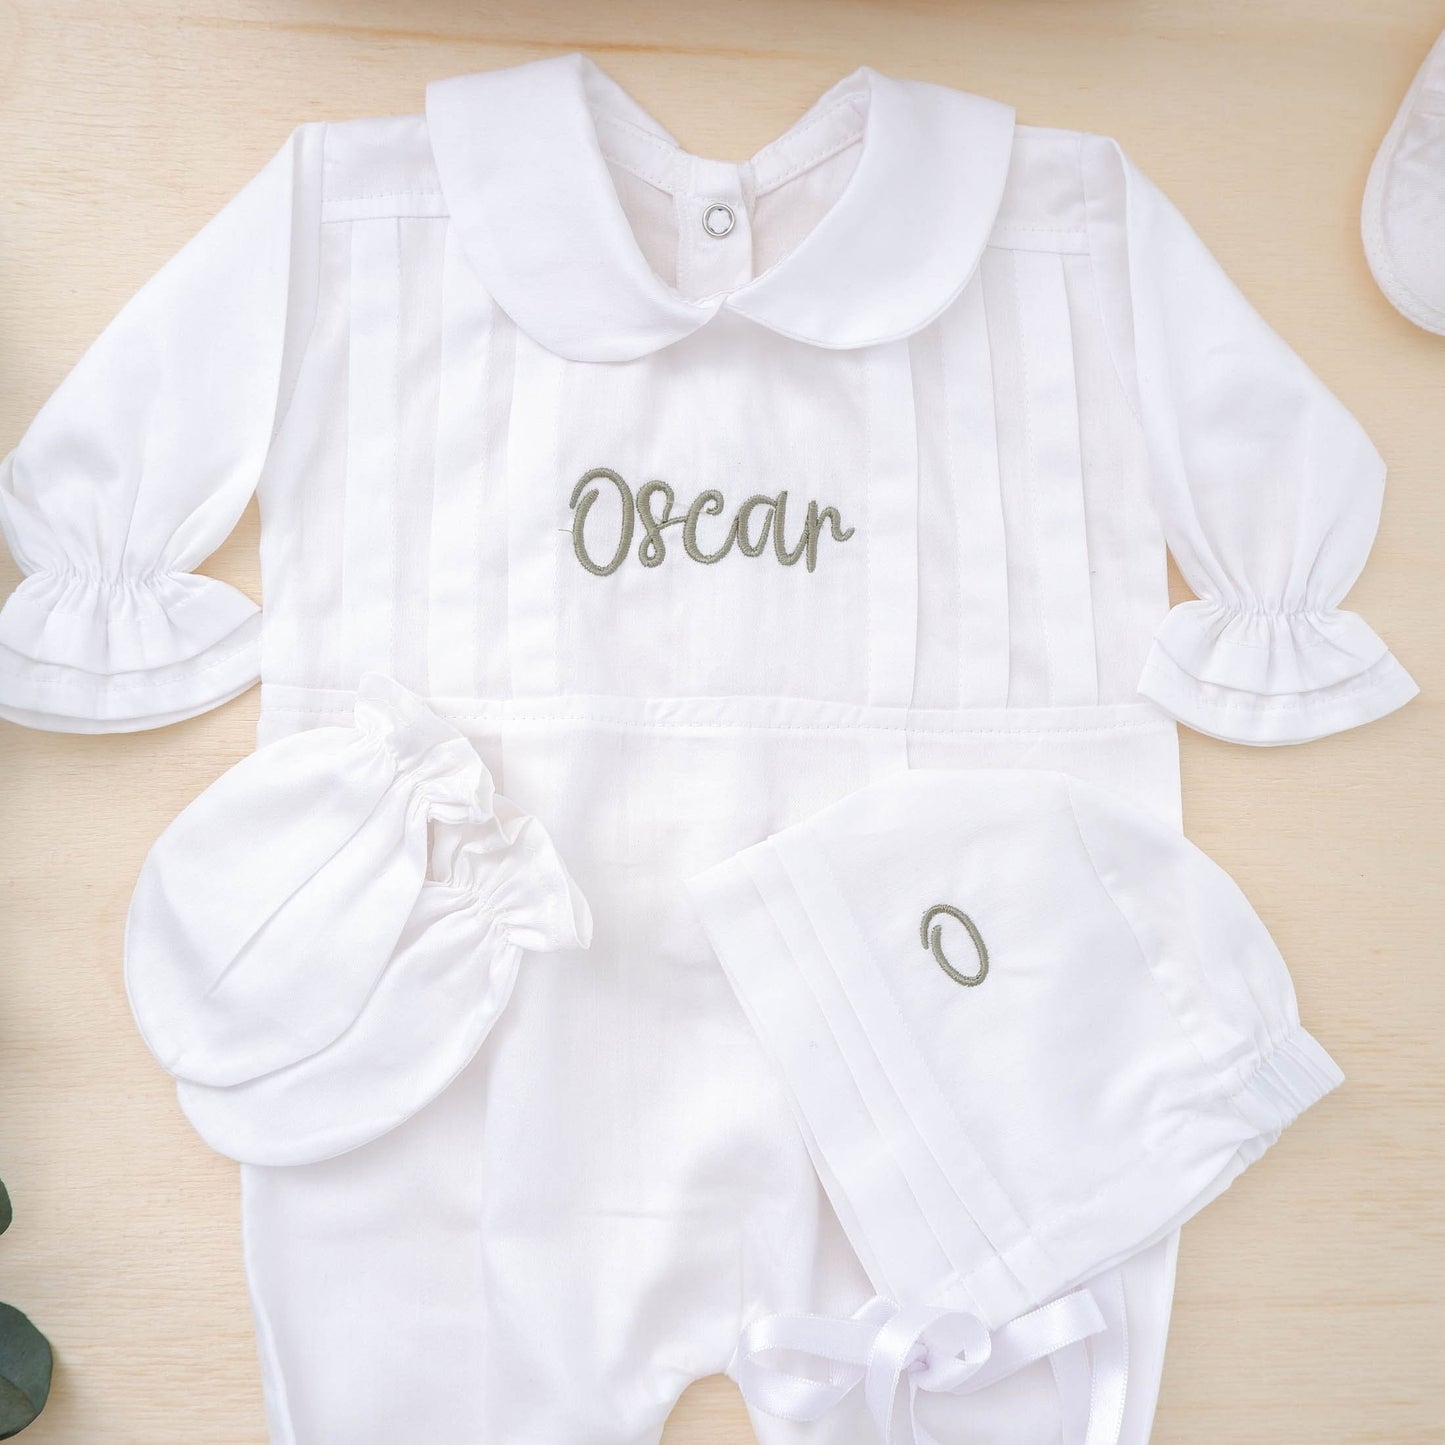 Personalisiertes Coming-Home-Outfit, Baby-Jungen-Coming-Home-Outfit, personalisiertes Geschenk für Neugeborene, individuelles Baby-Jungen-Krankenhaus-Outfit